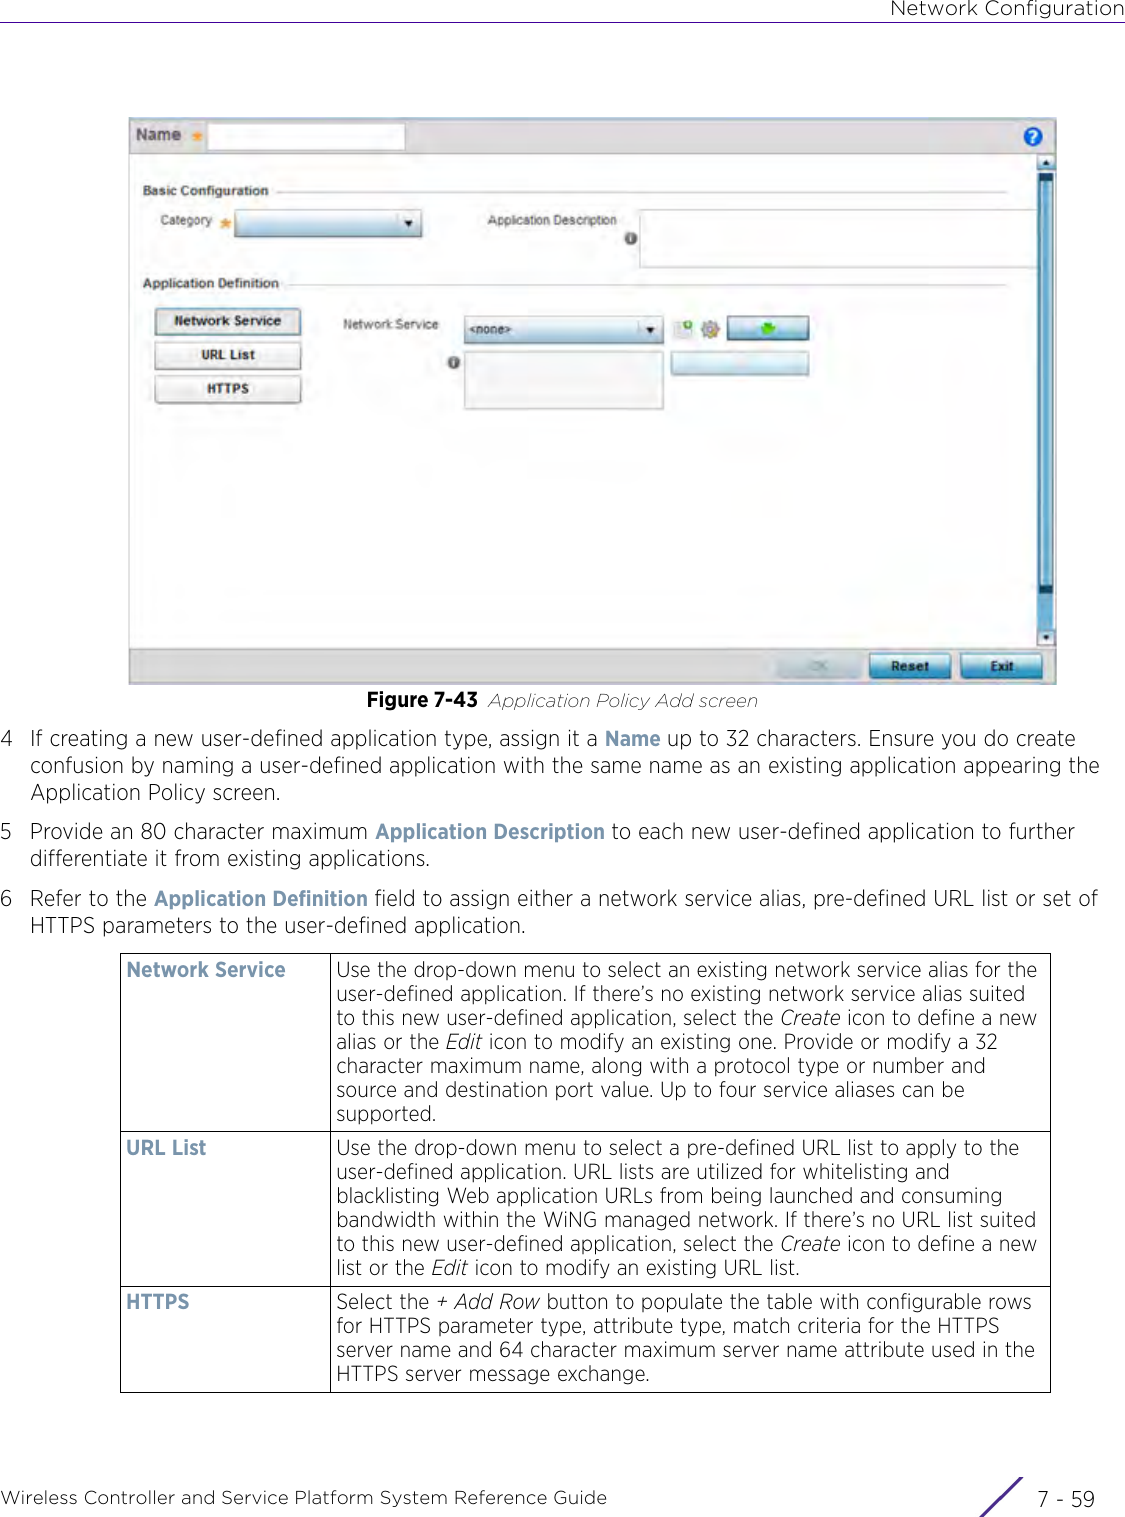 Network ConfigurationWireless Controller and Service Platform System Reference Guide 7 - 59Figure 7-43 Application Policy Add screen4 If creating a new user-defined application type, assign it a Name up to 32 characters. Ensure you do create confusion by naming a user-defined application with the same name as an existing application appearing the Application Policy screen.5 Provide an 80 character maximum Application Description to each new user-defined application to further differentiate it from existing applications.6 Refer to the Application Definition field to assign either a network service alias, pre-defined URL list or set of HTTPS parameters to the user-defined application.Network Service Use the drop-down menu to select an existing network service alias for the user-defined application. If there’s no existing network service alias suited to this new user-defined application, select the Create icon to define a new alias or the Edit icon to modify an existing one. Provide or modify a 32 character maximum name, along with a protocol type or number and source and destination port value. Up to four service aliases can be supported.URL List Use the drop-down menu to select a pre-defined URL list to apply to the user-defined application. URL lists are utilized for whitelisting and blacklisting Web application URLs from being launched and consuming bandwidth within the WiNG managed network. If there’s no URL list suited to this new user-defined application, select the Create icon to define a new list or the Edit icon to modify an existing URL list.HTTPS Select the + Add Row button to populate the table with configurable rows for HTTPS parameter type, attribute type, match criteria for the HTTPS server name and 64 character maximum server name attribute used in the HTTPS server message exchange.